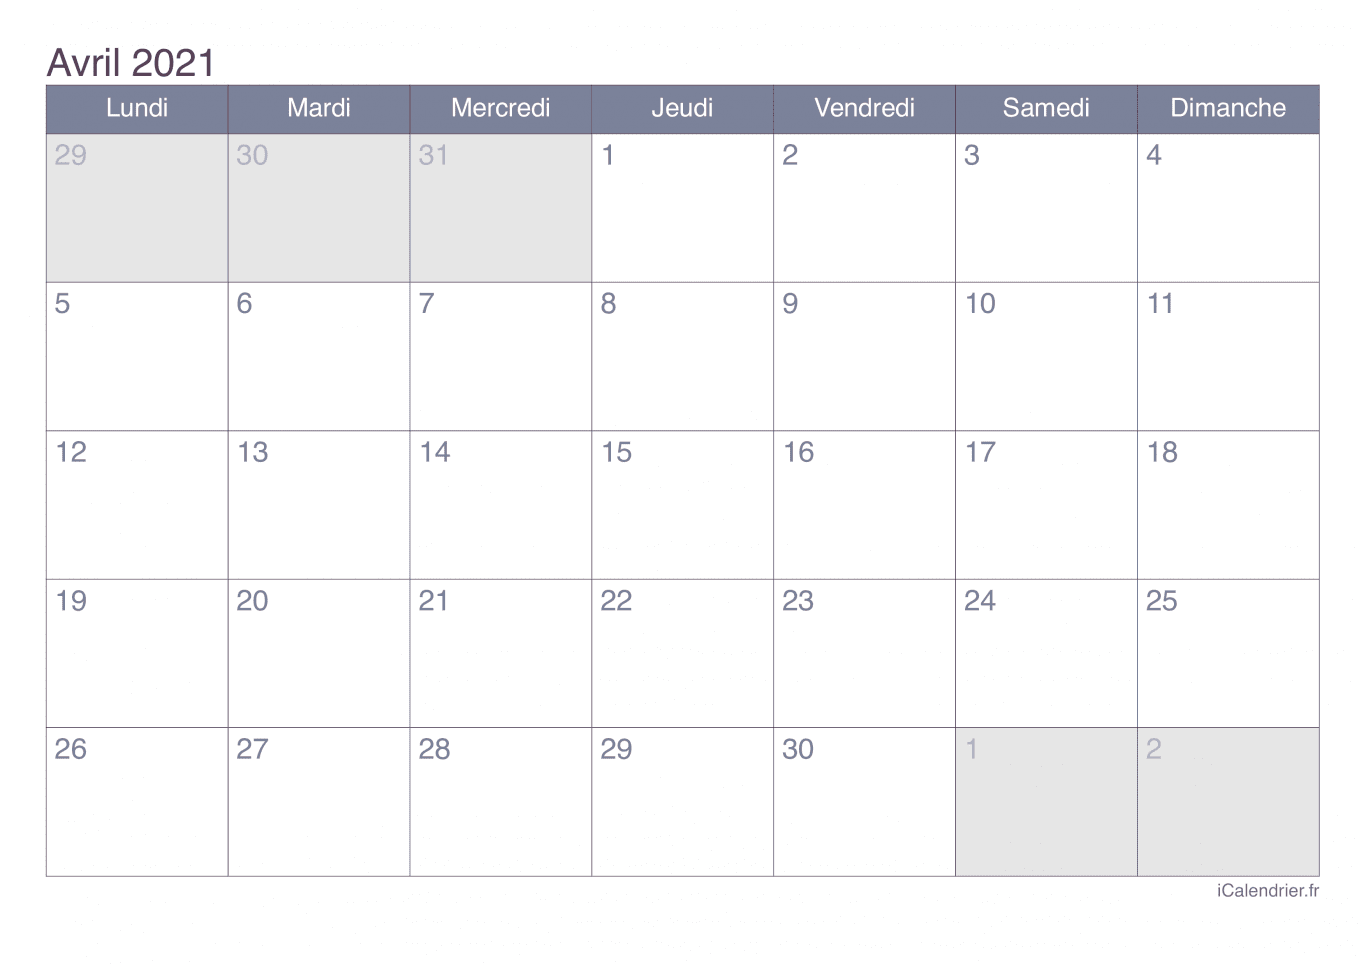 Calendrier d'avril 2021 - Office